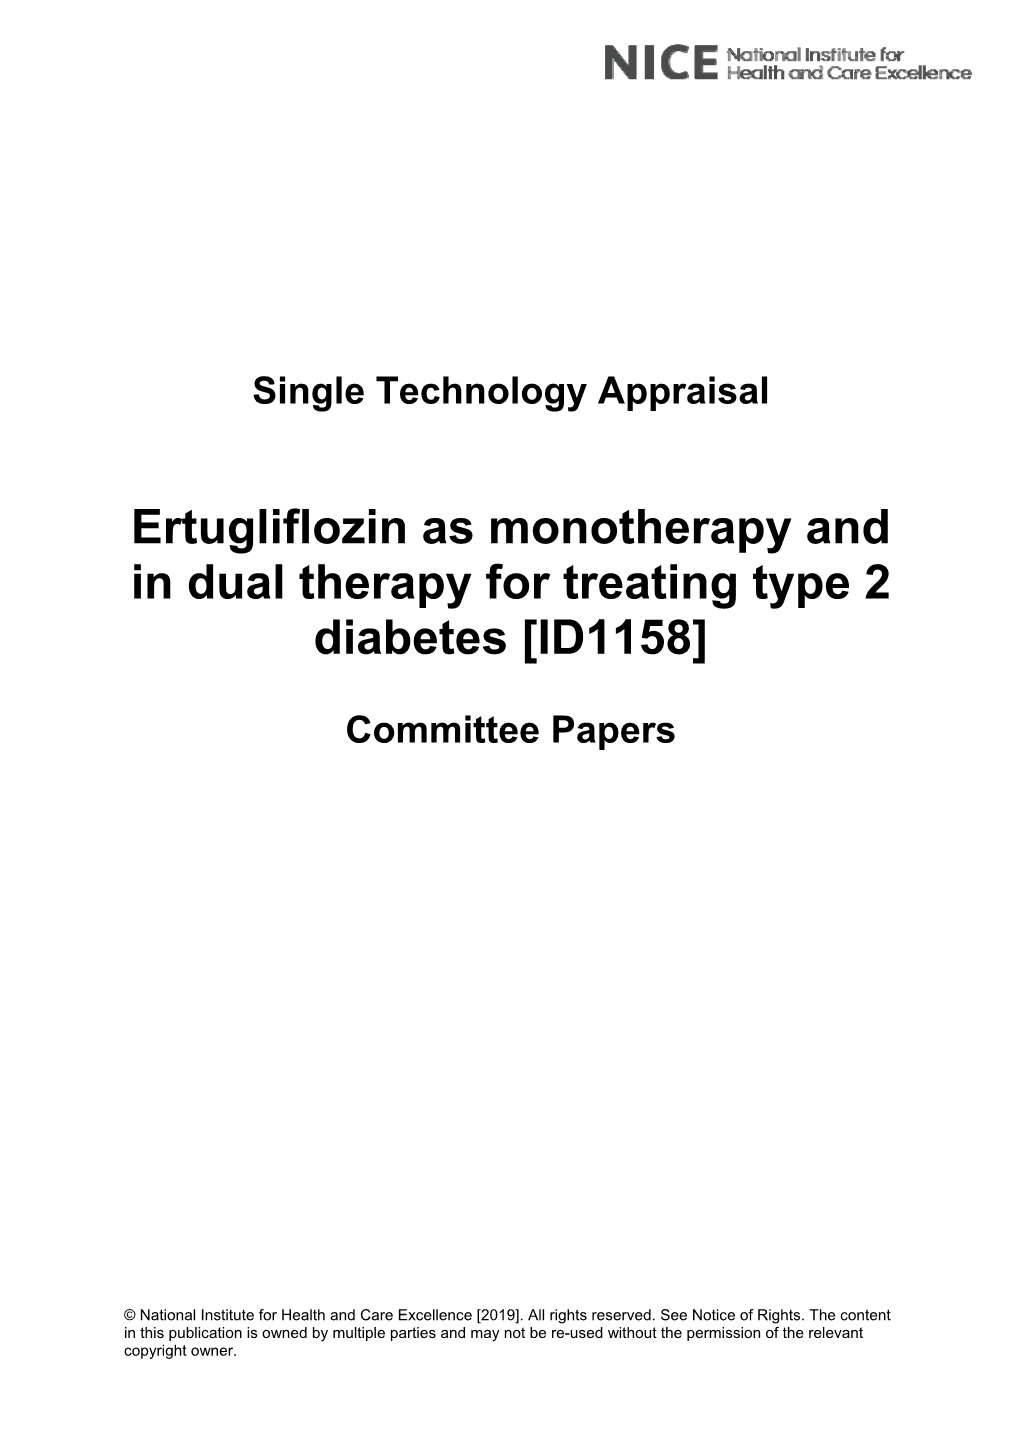 Ertugliflozin As Monotherapy and in Dual Therapy for Treating Type 2 Diabetes [ID1158]